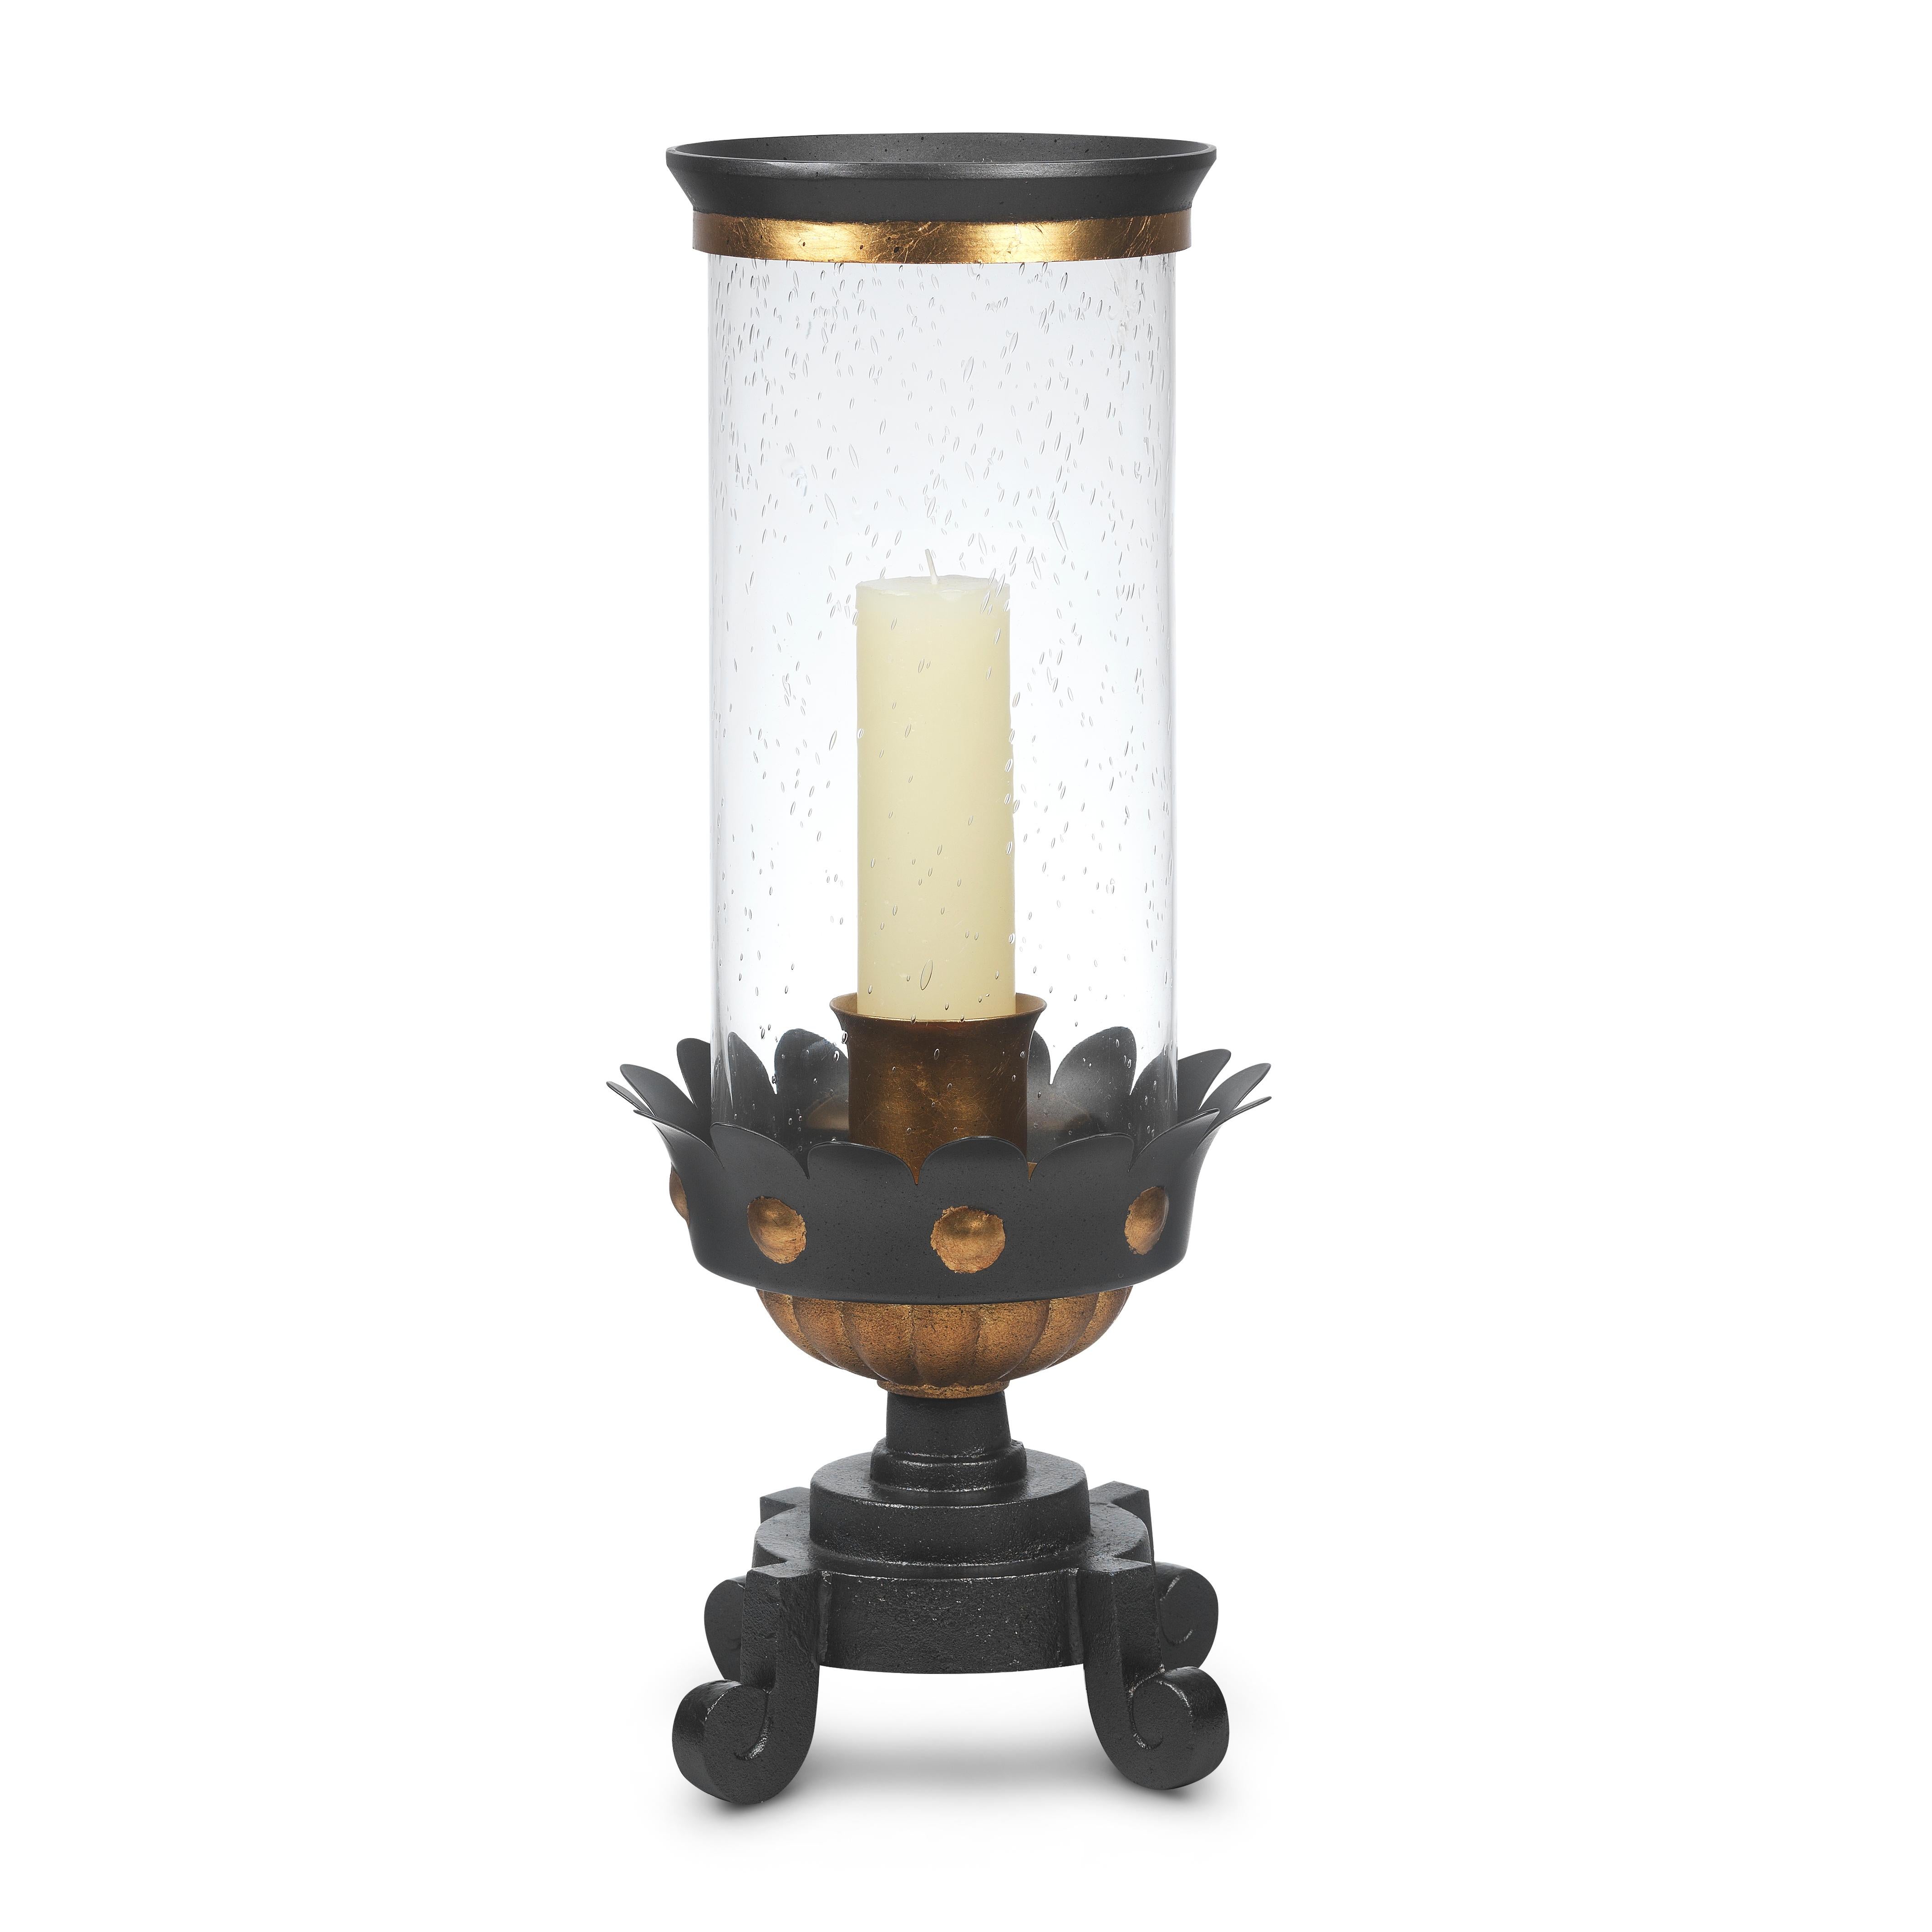 The parcel gilt, gadrooned and stylized floret body defines this 1940s-inspired hurricane. A weighted forged iron base supports the metal-capped glass shade. Accommodates a 2